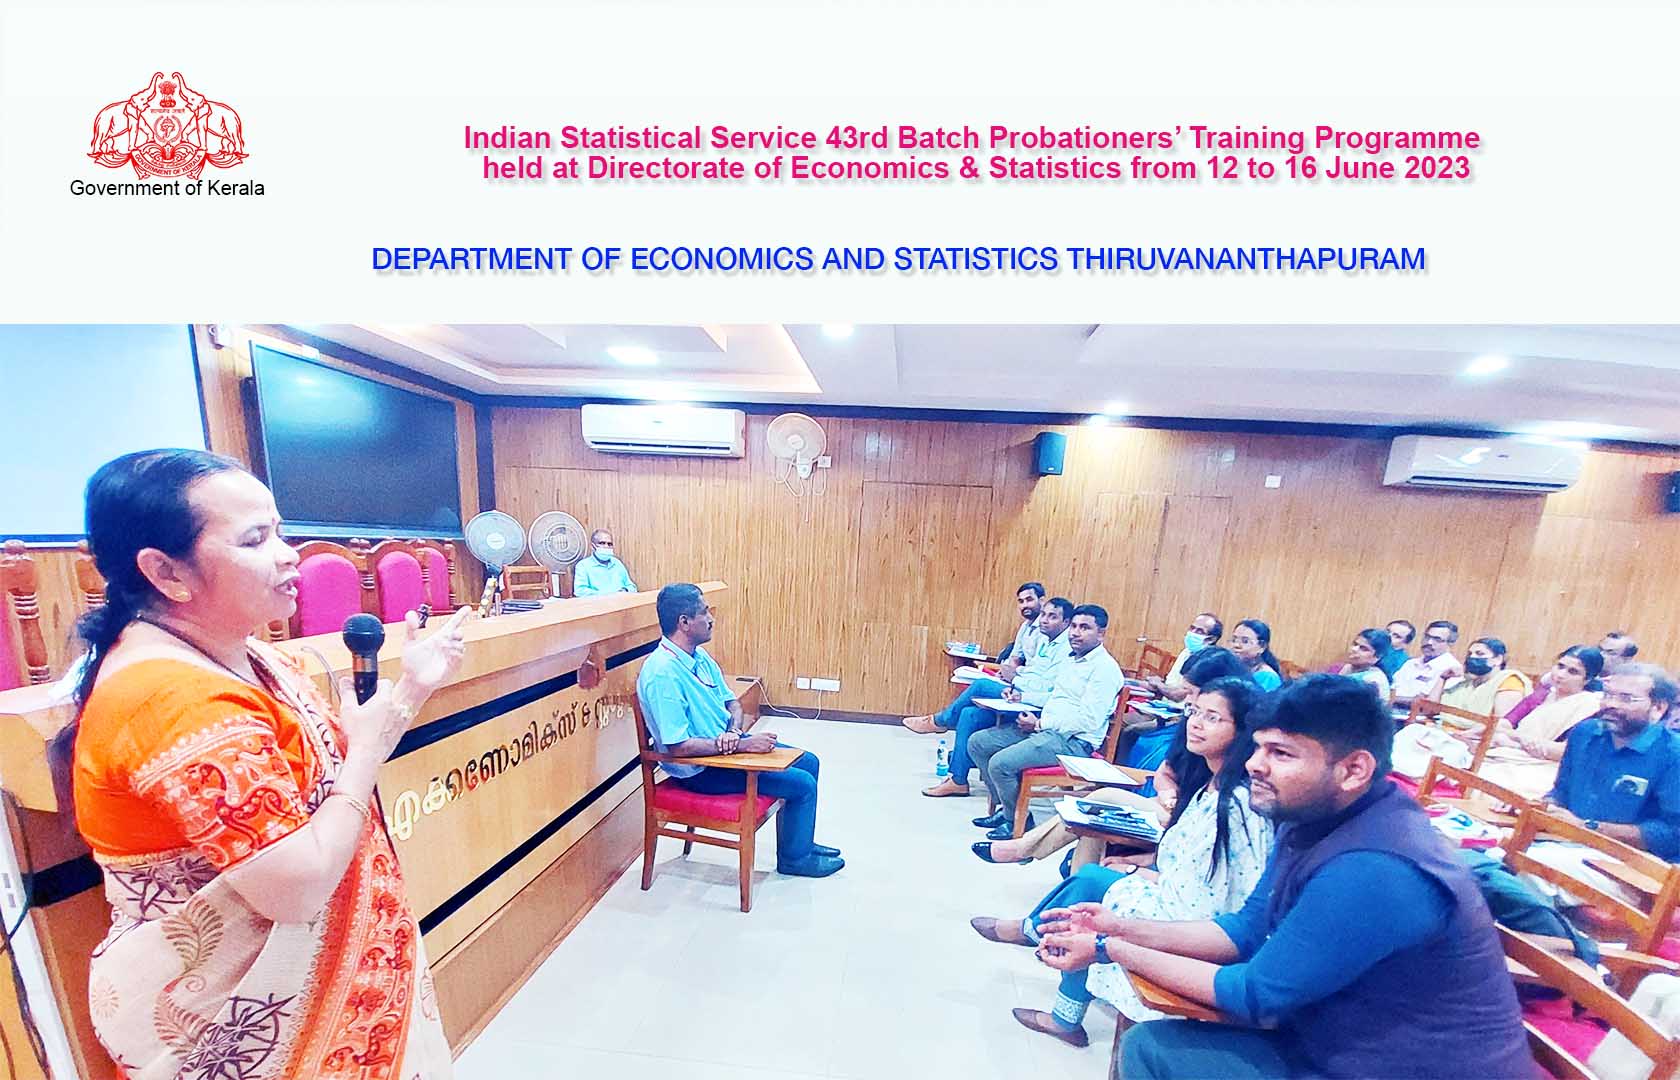 Smt. Sudharsa R, Joint Director delivering vote of thanks during the valedictory session